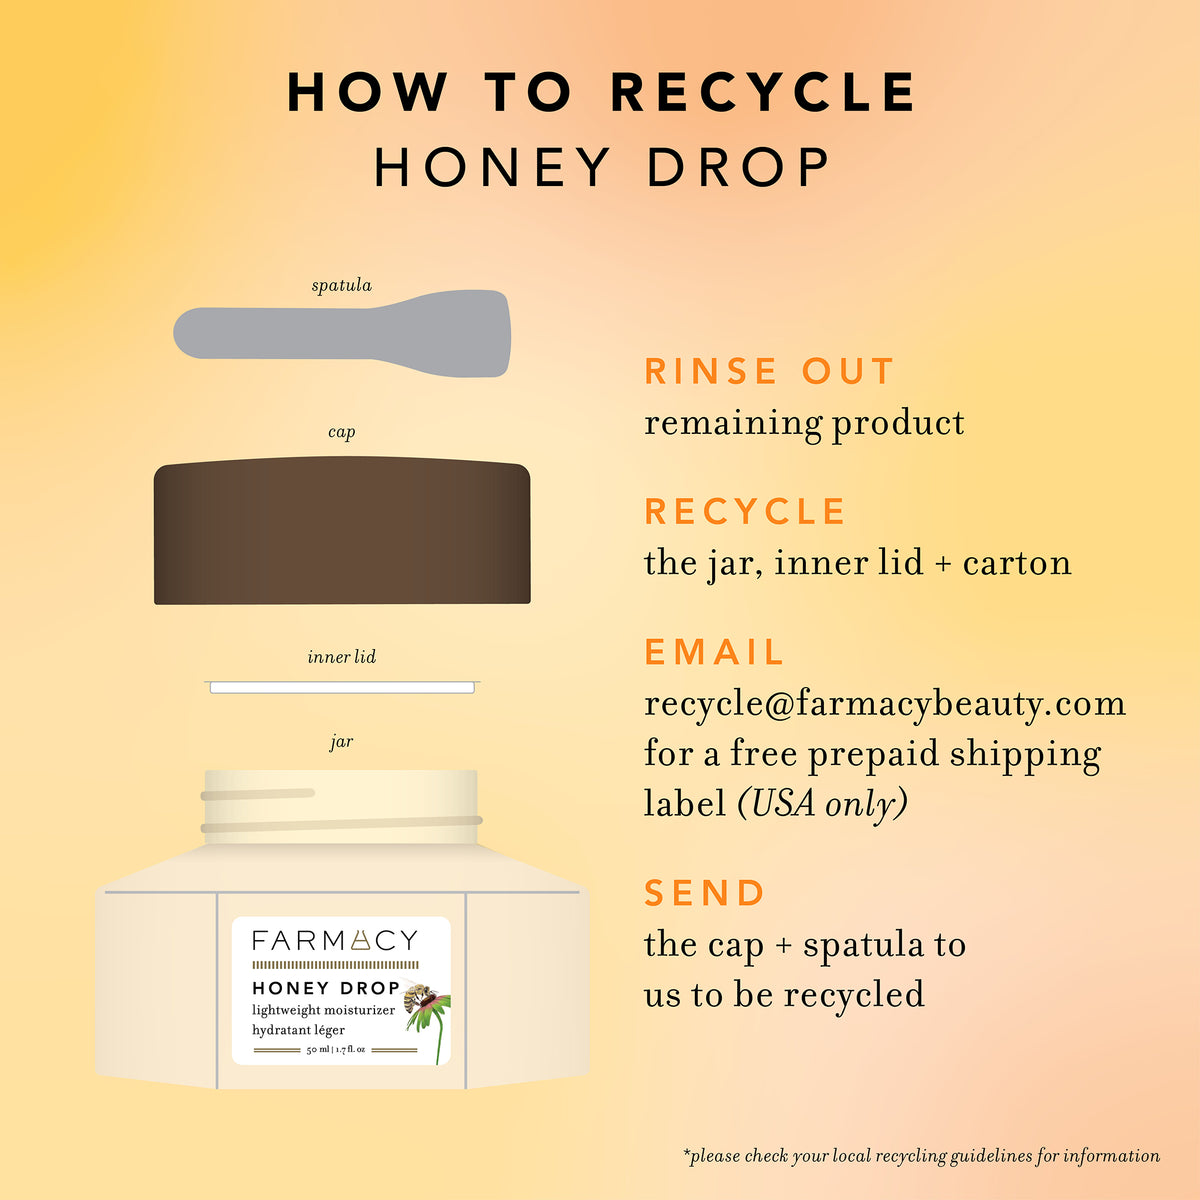 How to recycle Honey Drop